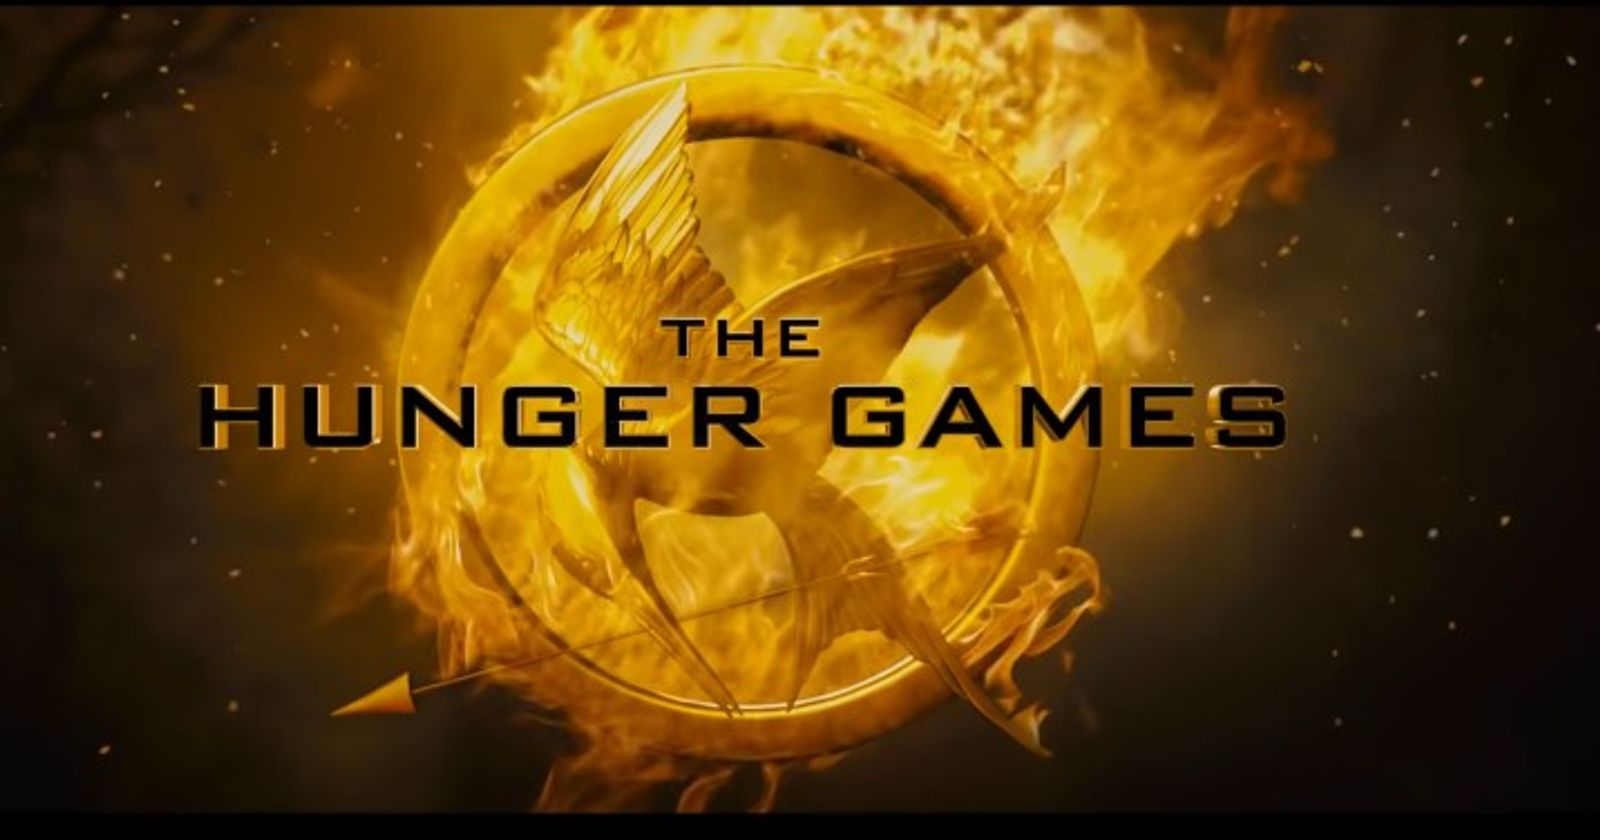 The Hunger Games streaming: where to watch online?